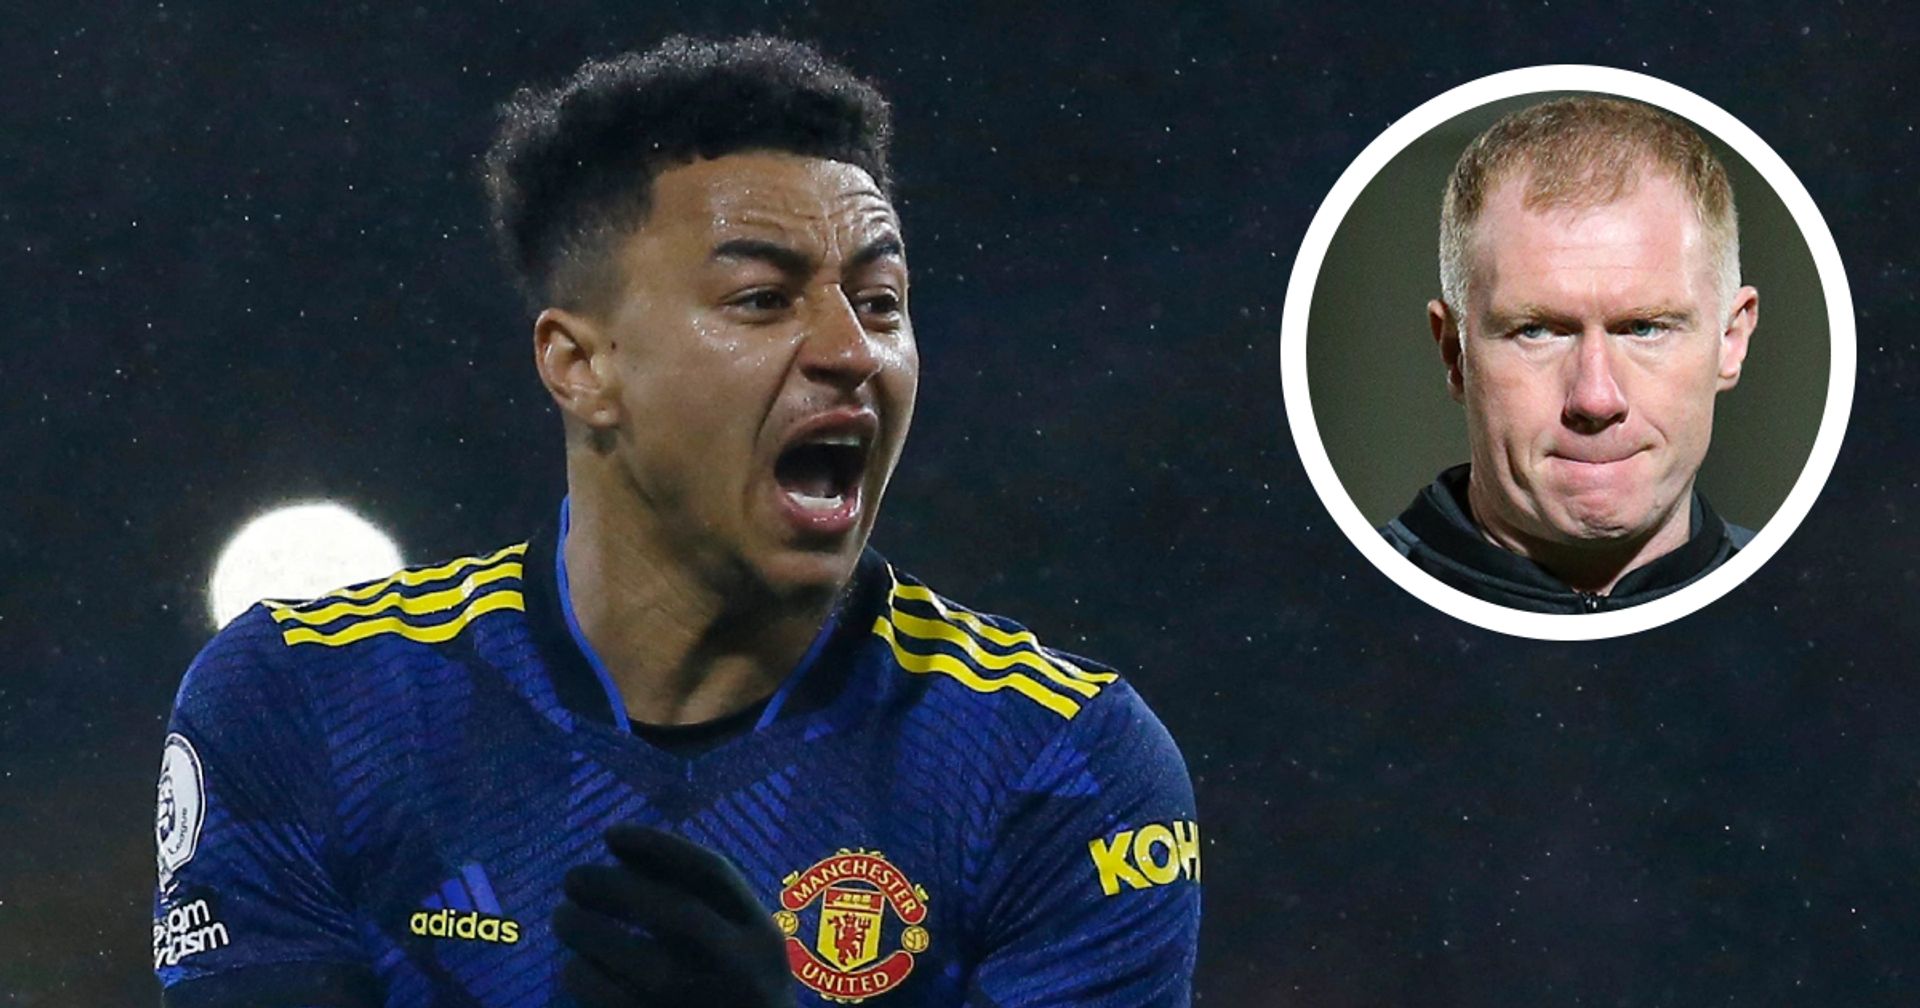 Paul Scholes regrets letting slip Lingard's comment on dressing room 'disaster'